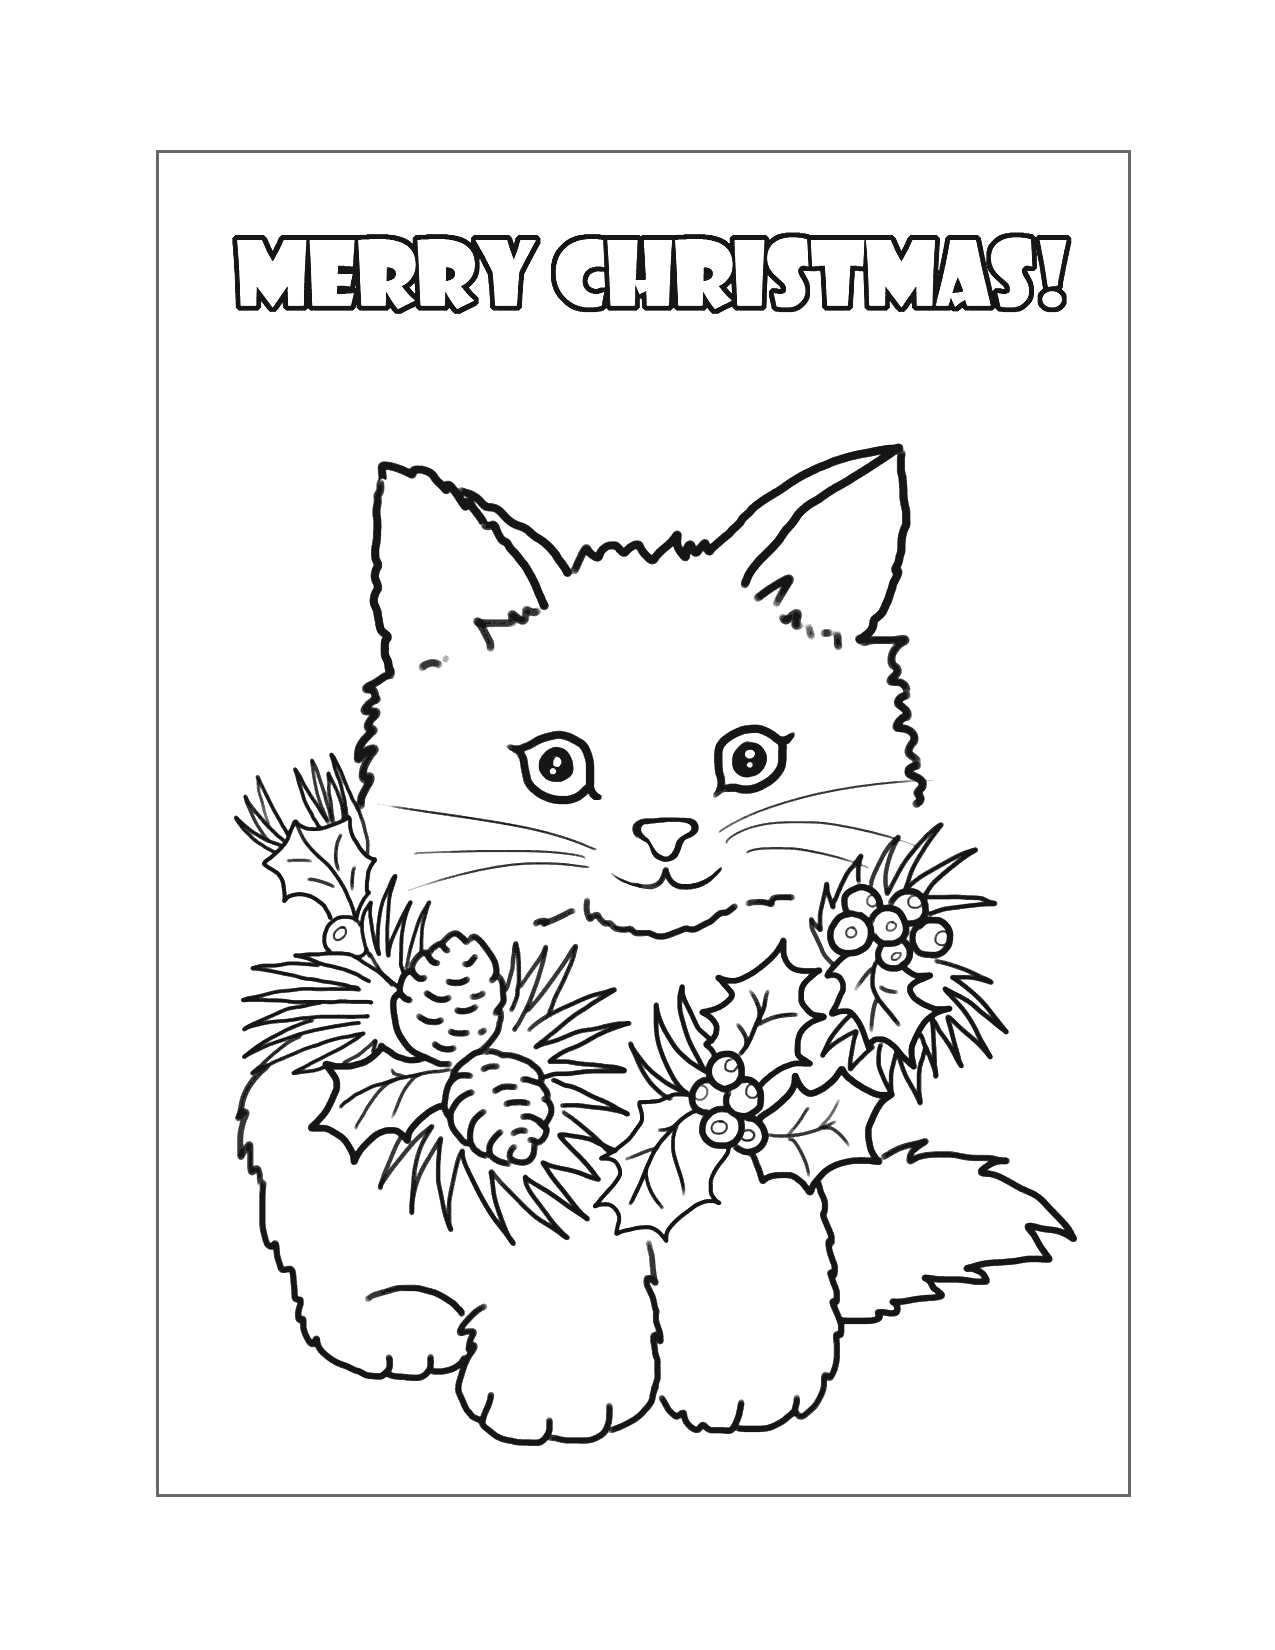 Cute Fuzzy Christmas Kitten Coloring Page